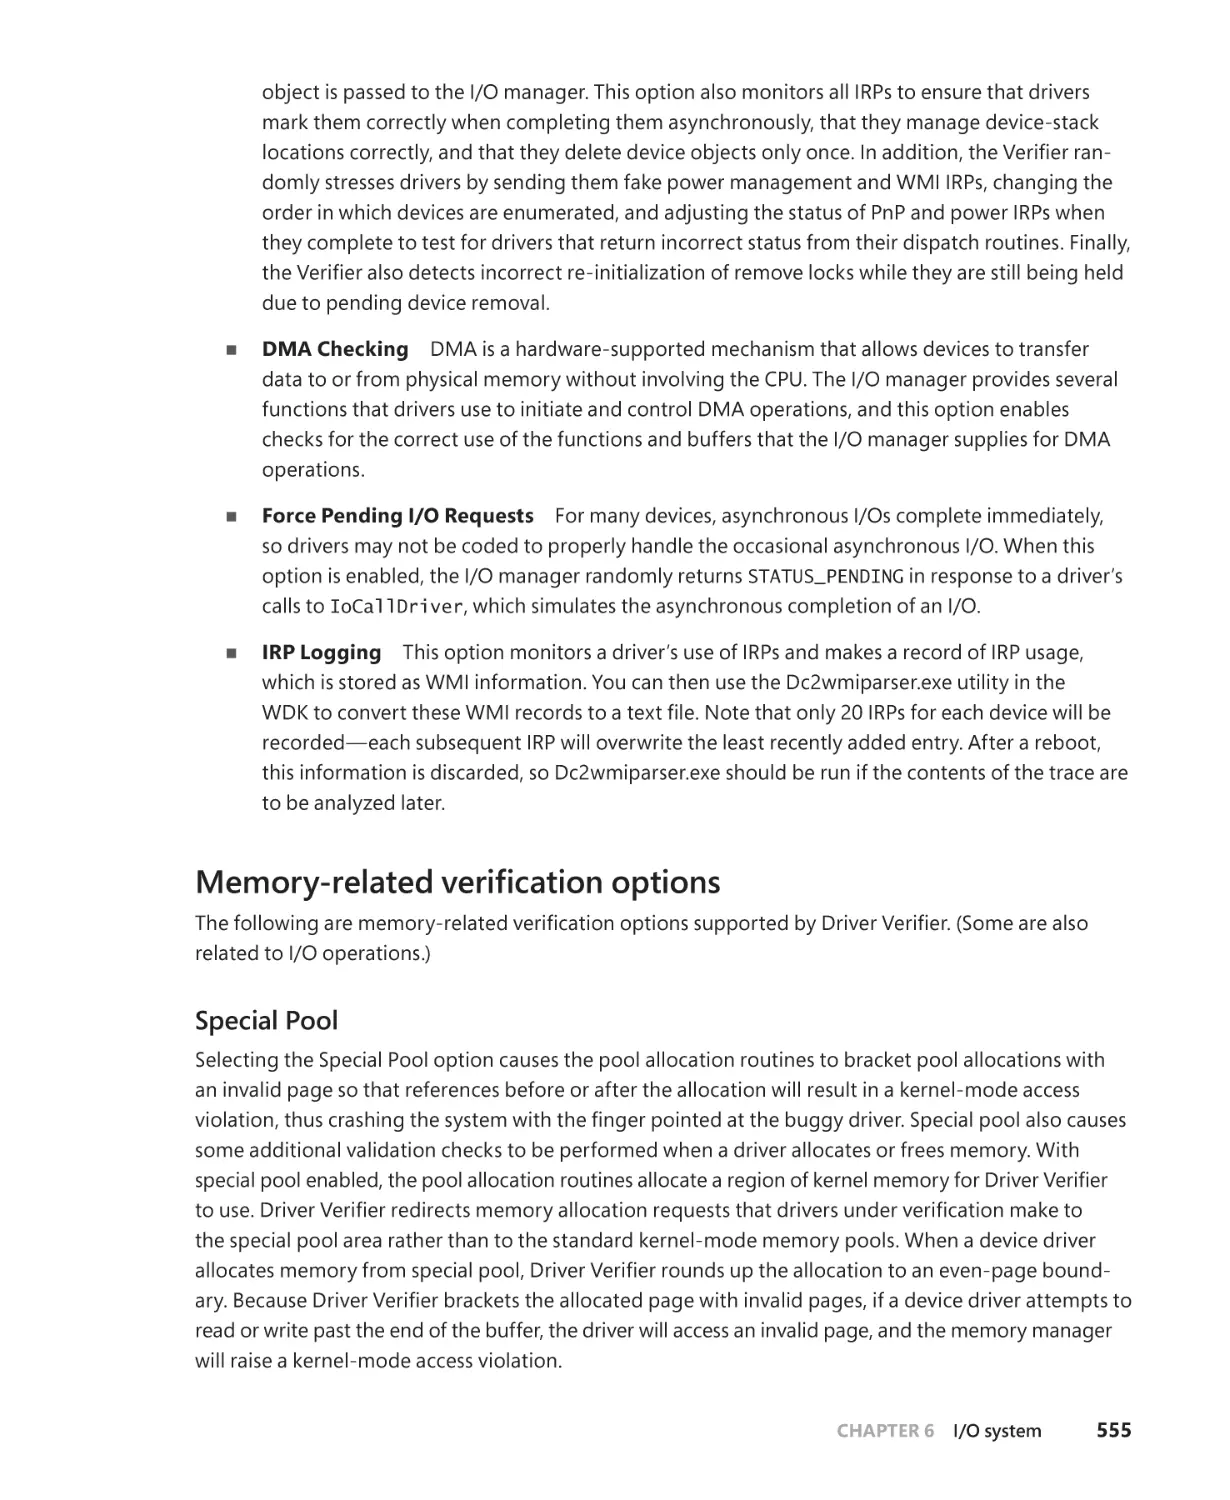 Memory-related verification options